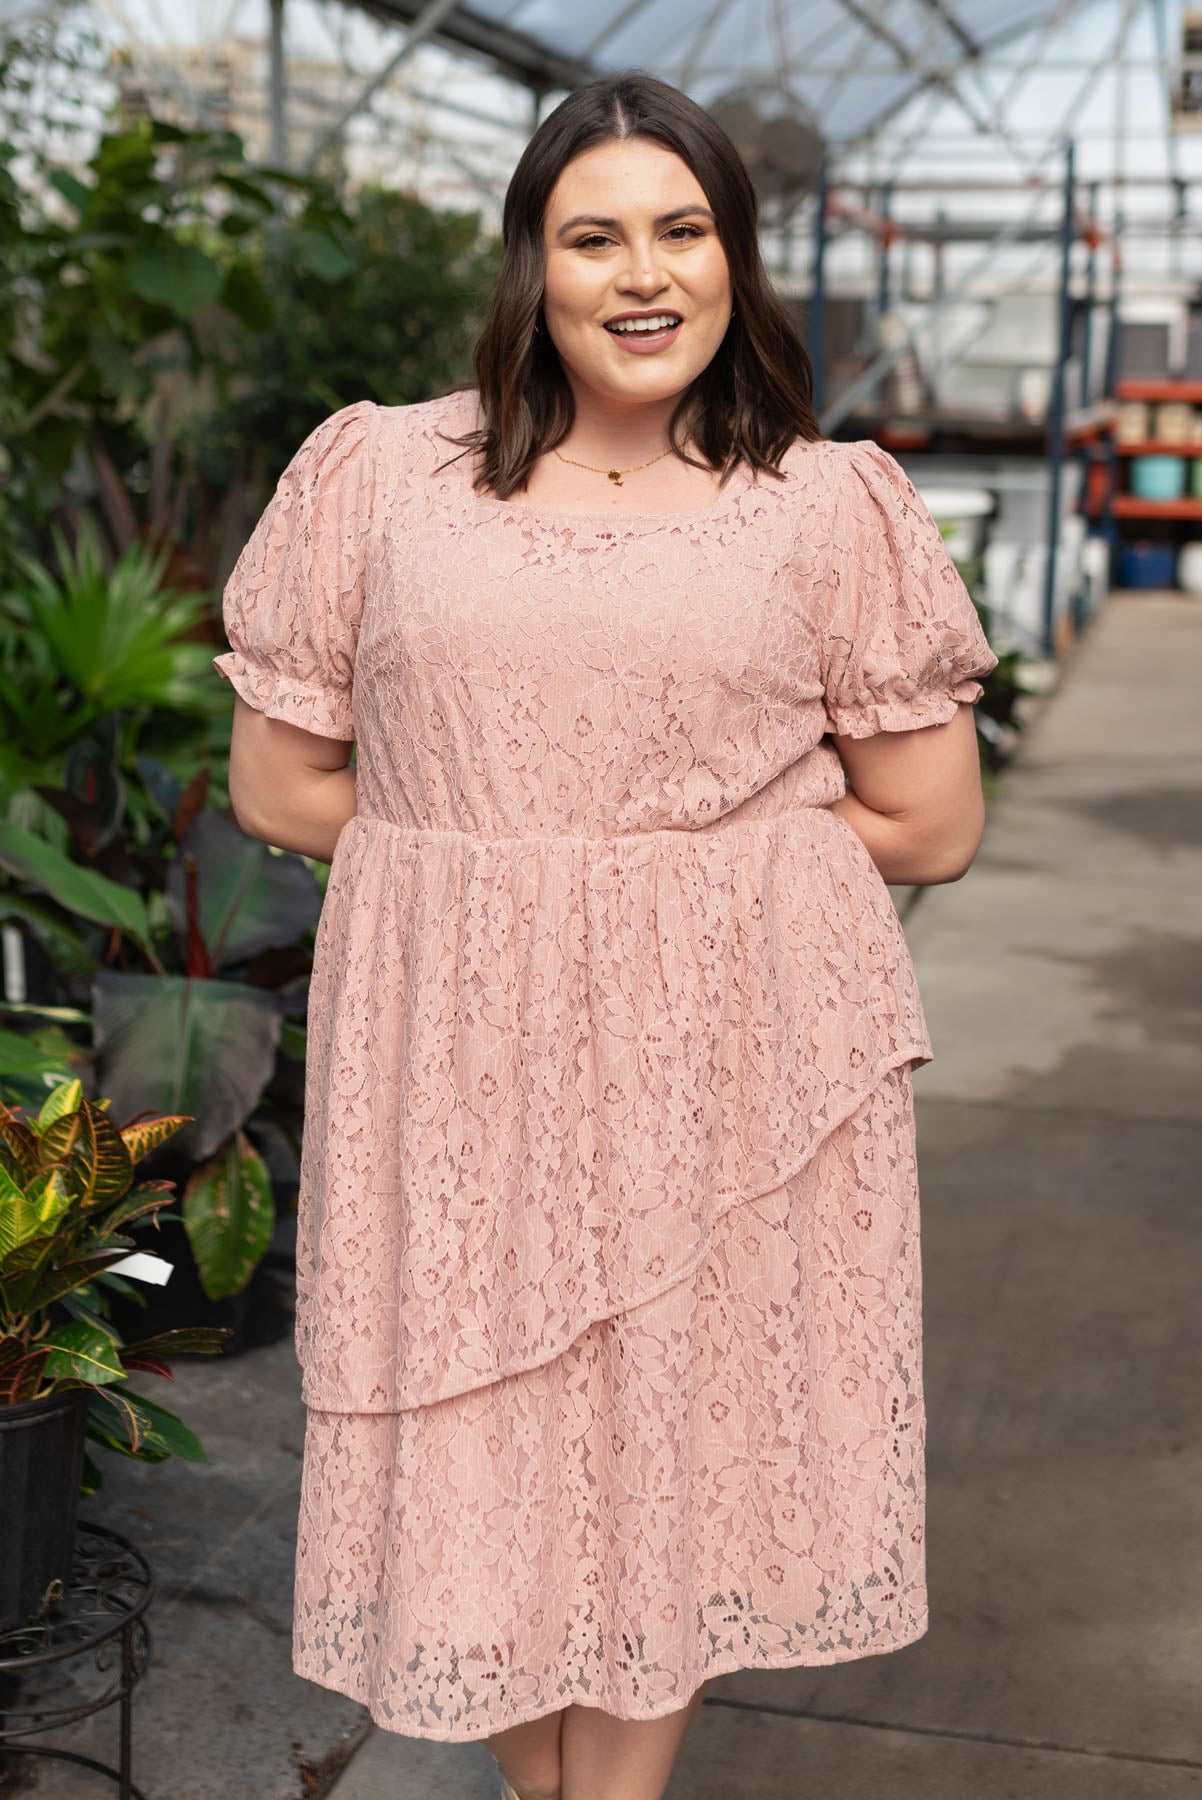 Short sleeve dusty pink lace tiered dress